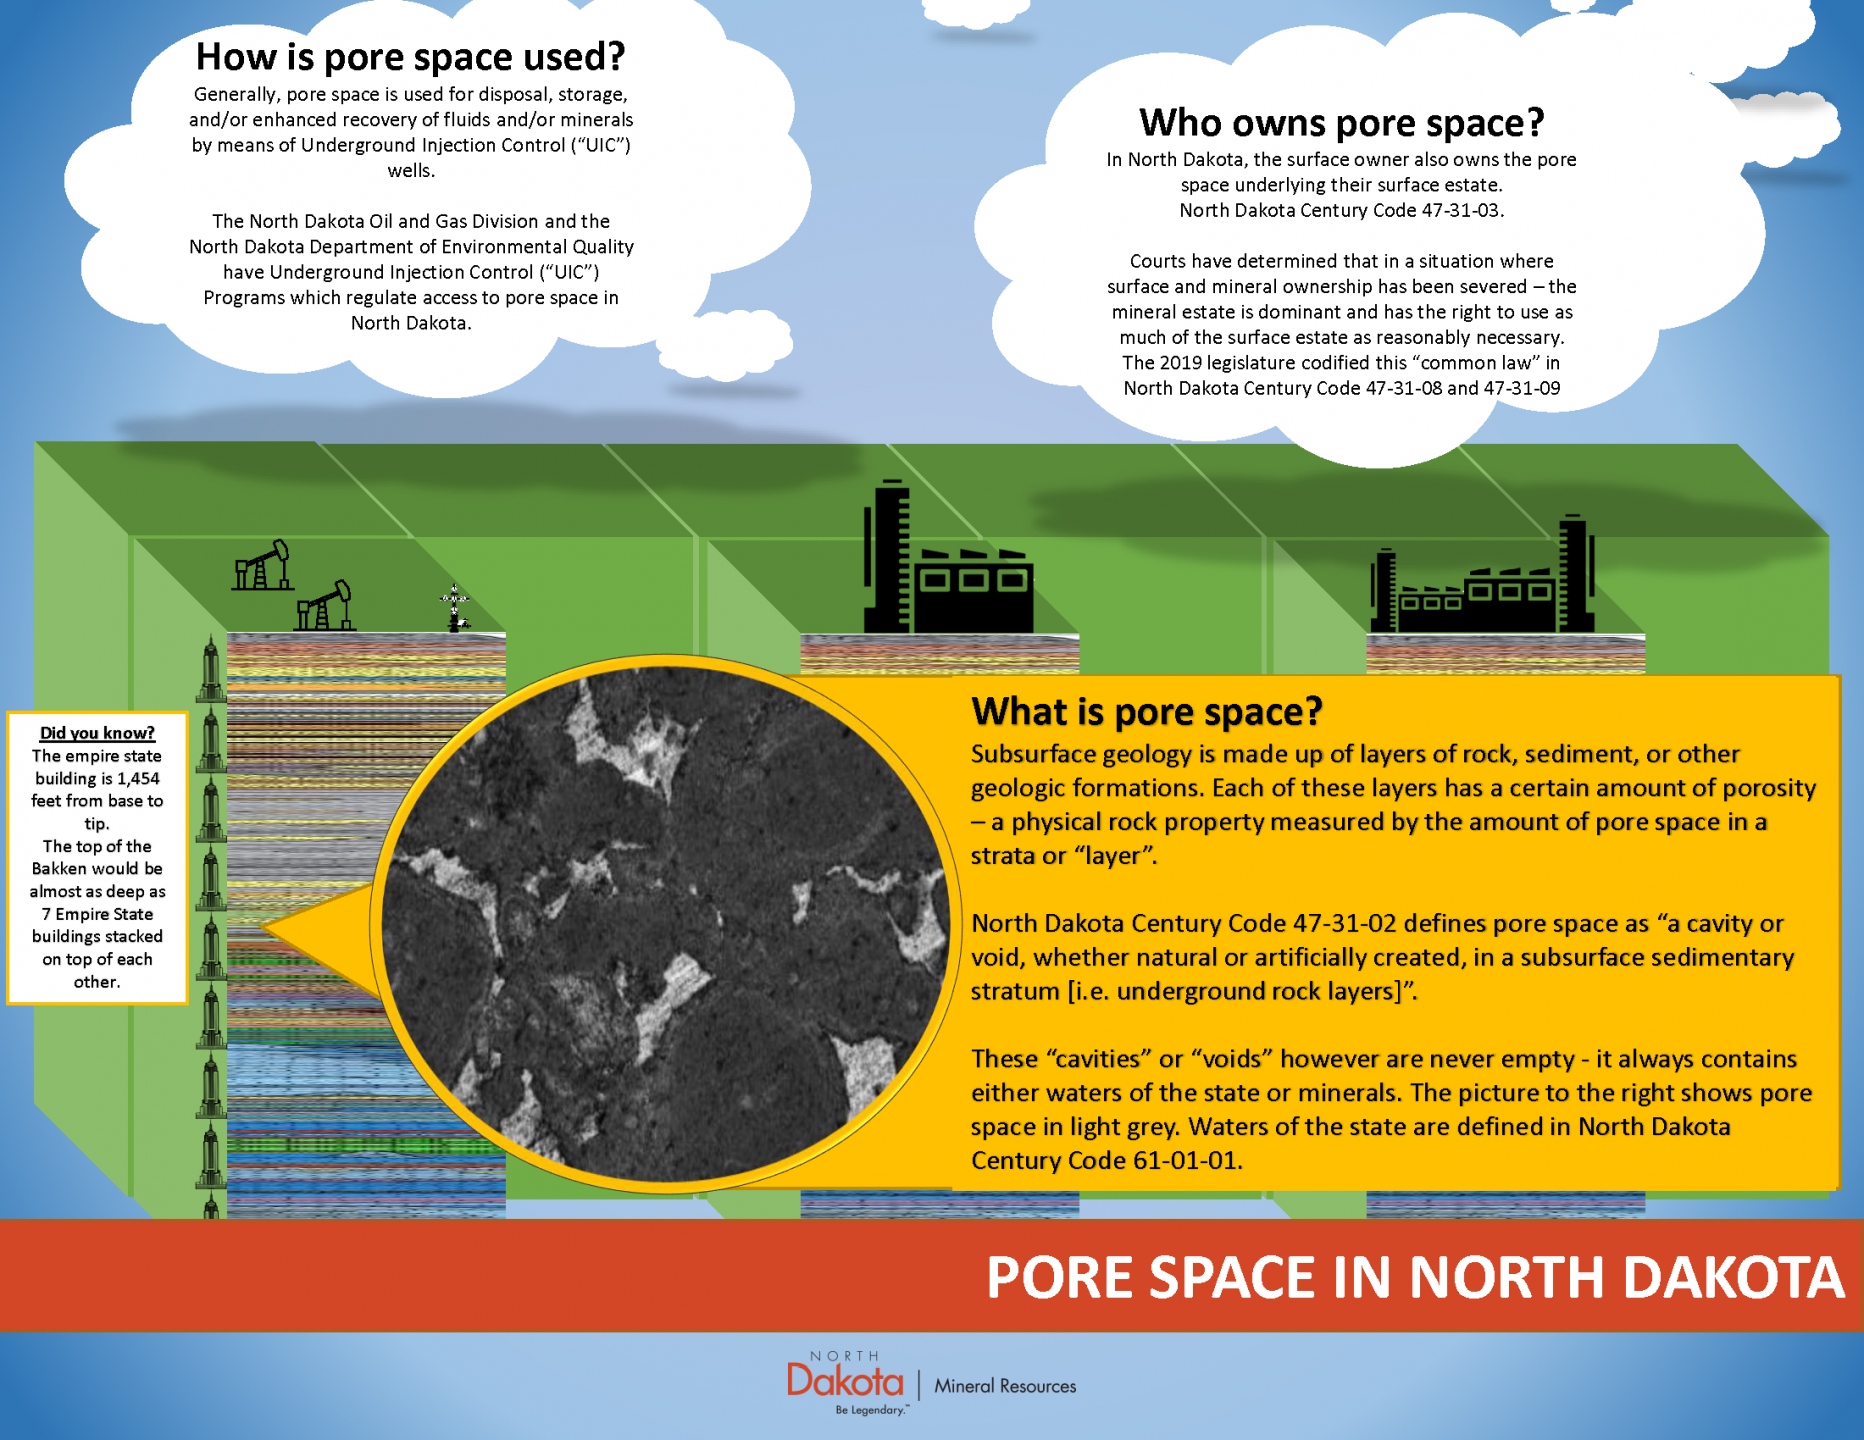 What is Pore Space?